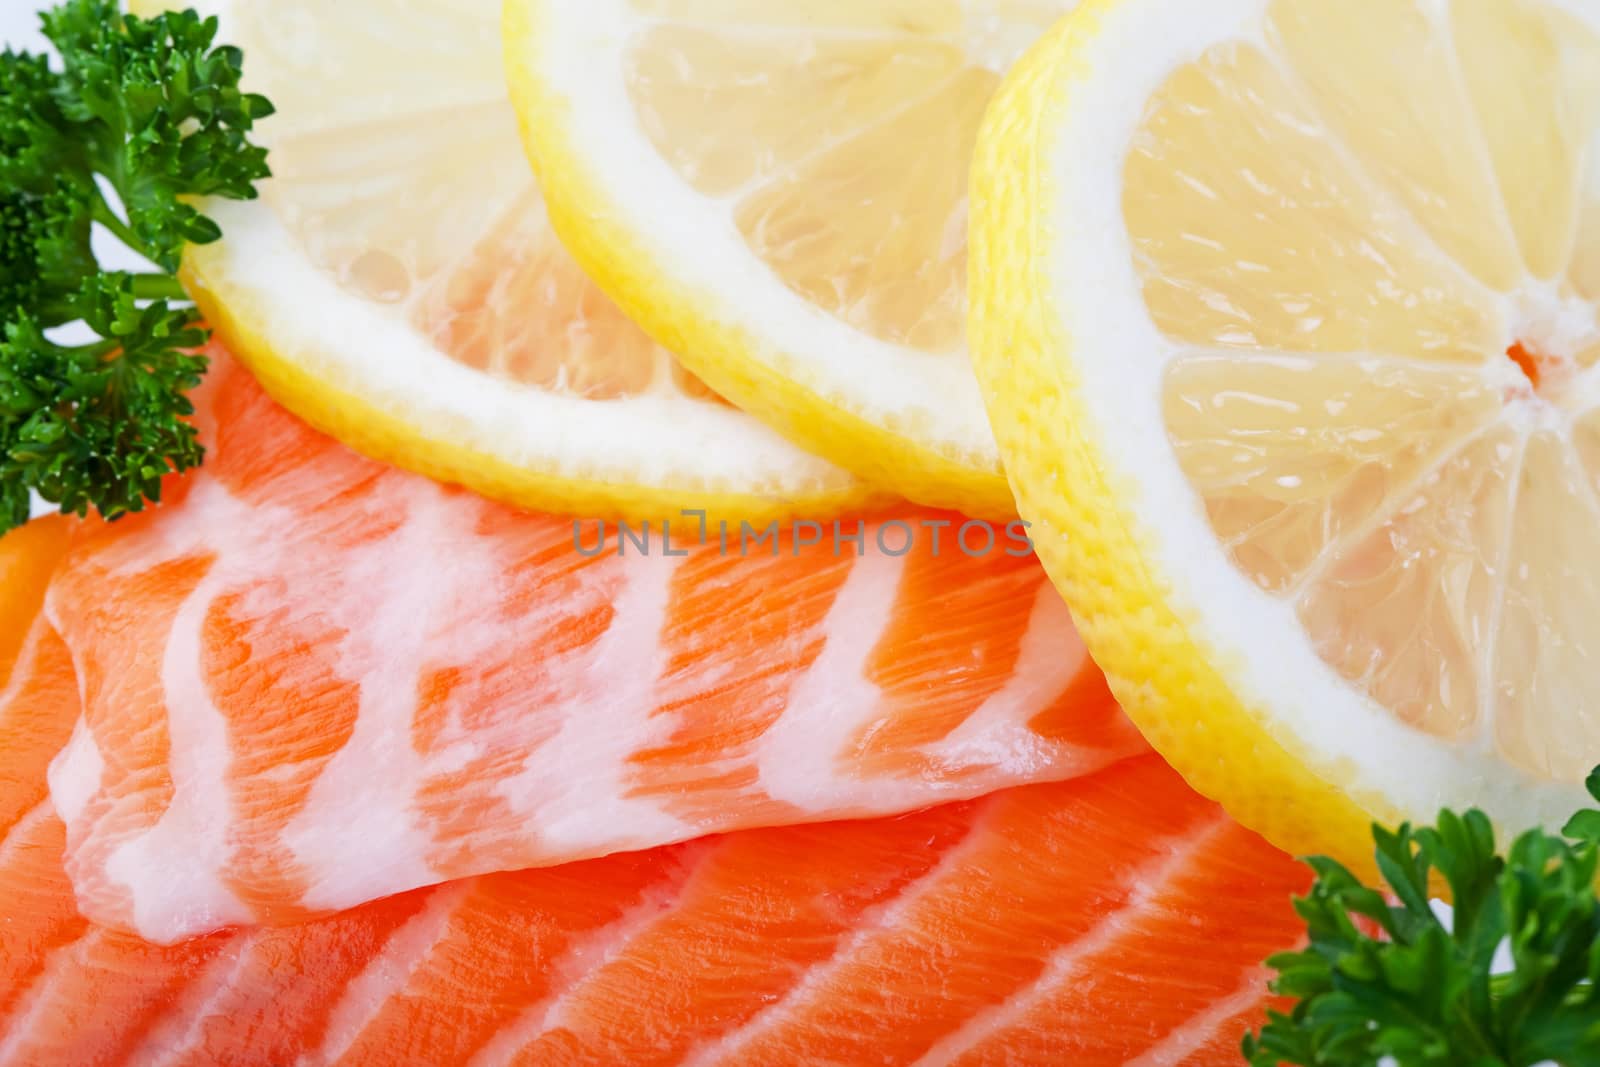 Fillets of fresh salmon with lemon slices  on ice.  Macro.